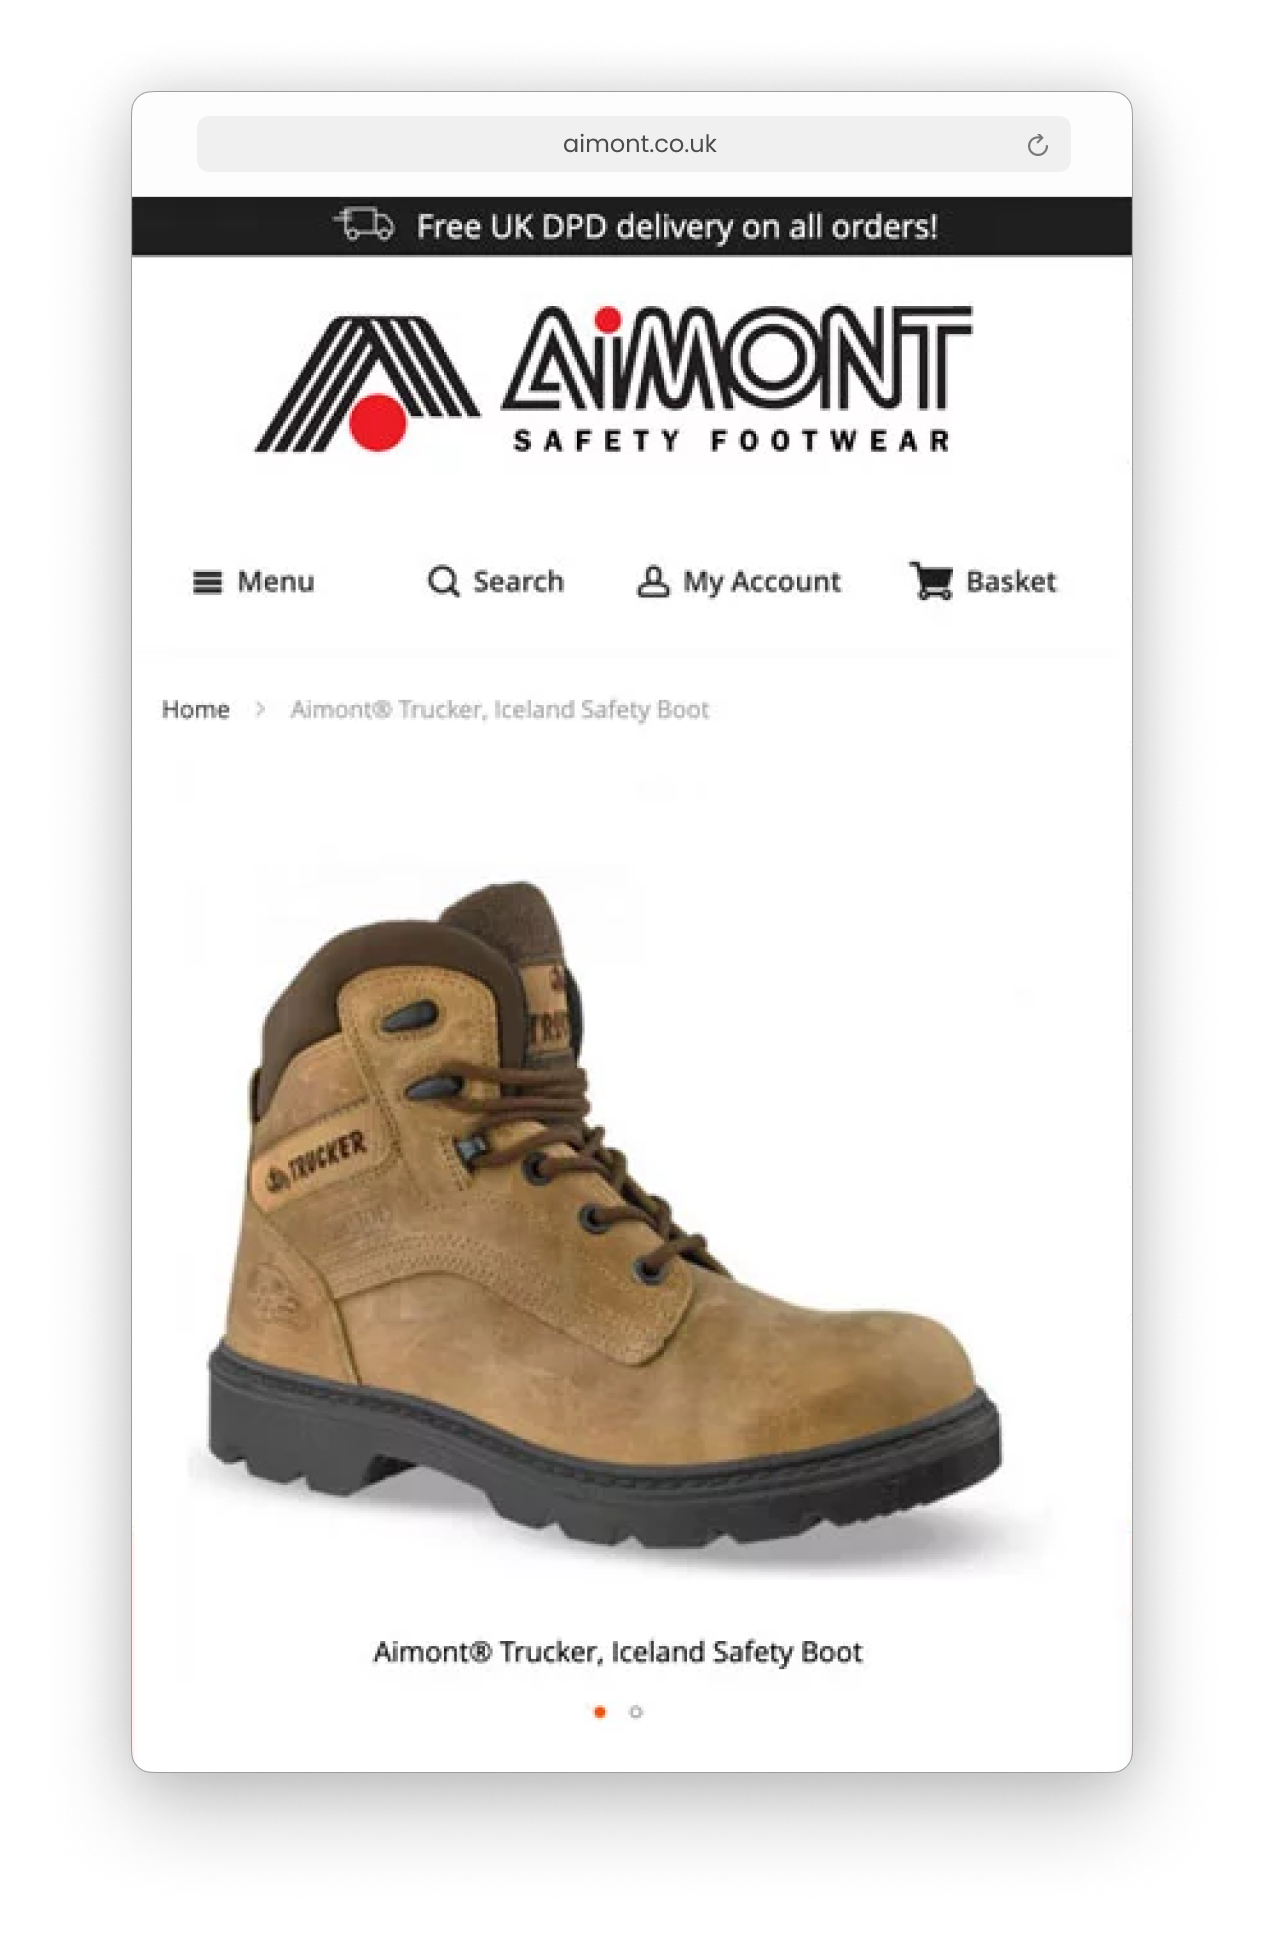 Mobile view of the Aimont Safety Footwear product page